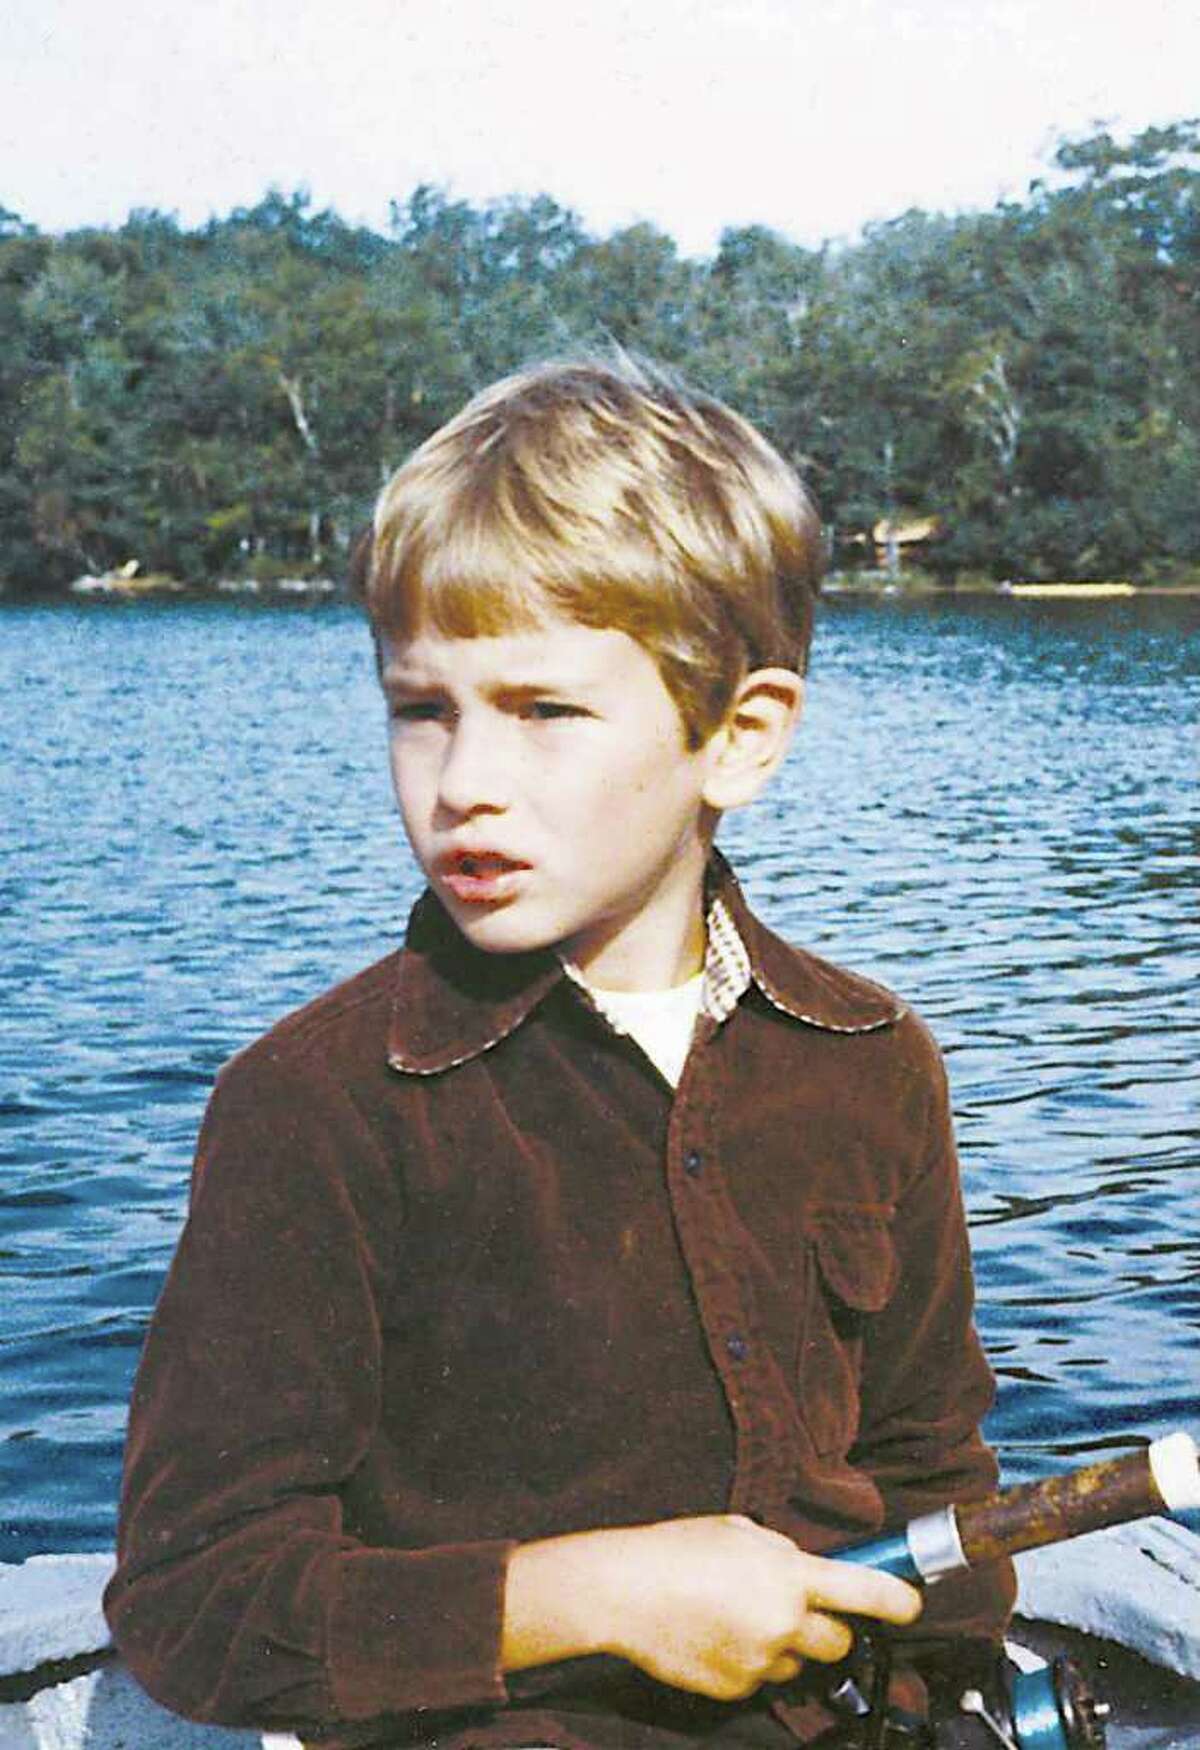 Matthew Margolies, shown here in 1982. Margolies was murdered in 1984. The case remains unsolved.